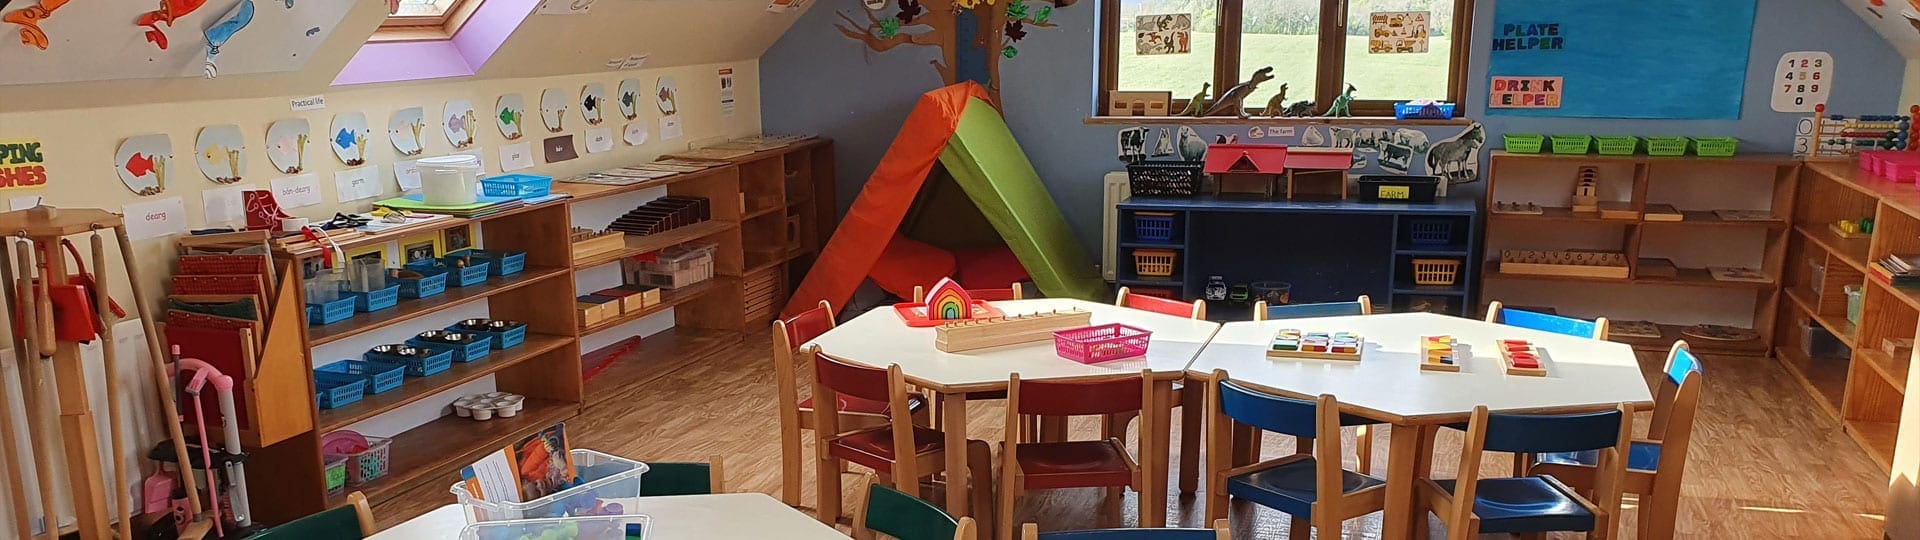 Higner ECCE Year 2 Room Childcare Mellowesh Quality Ban